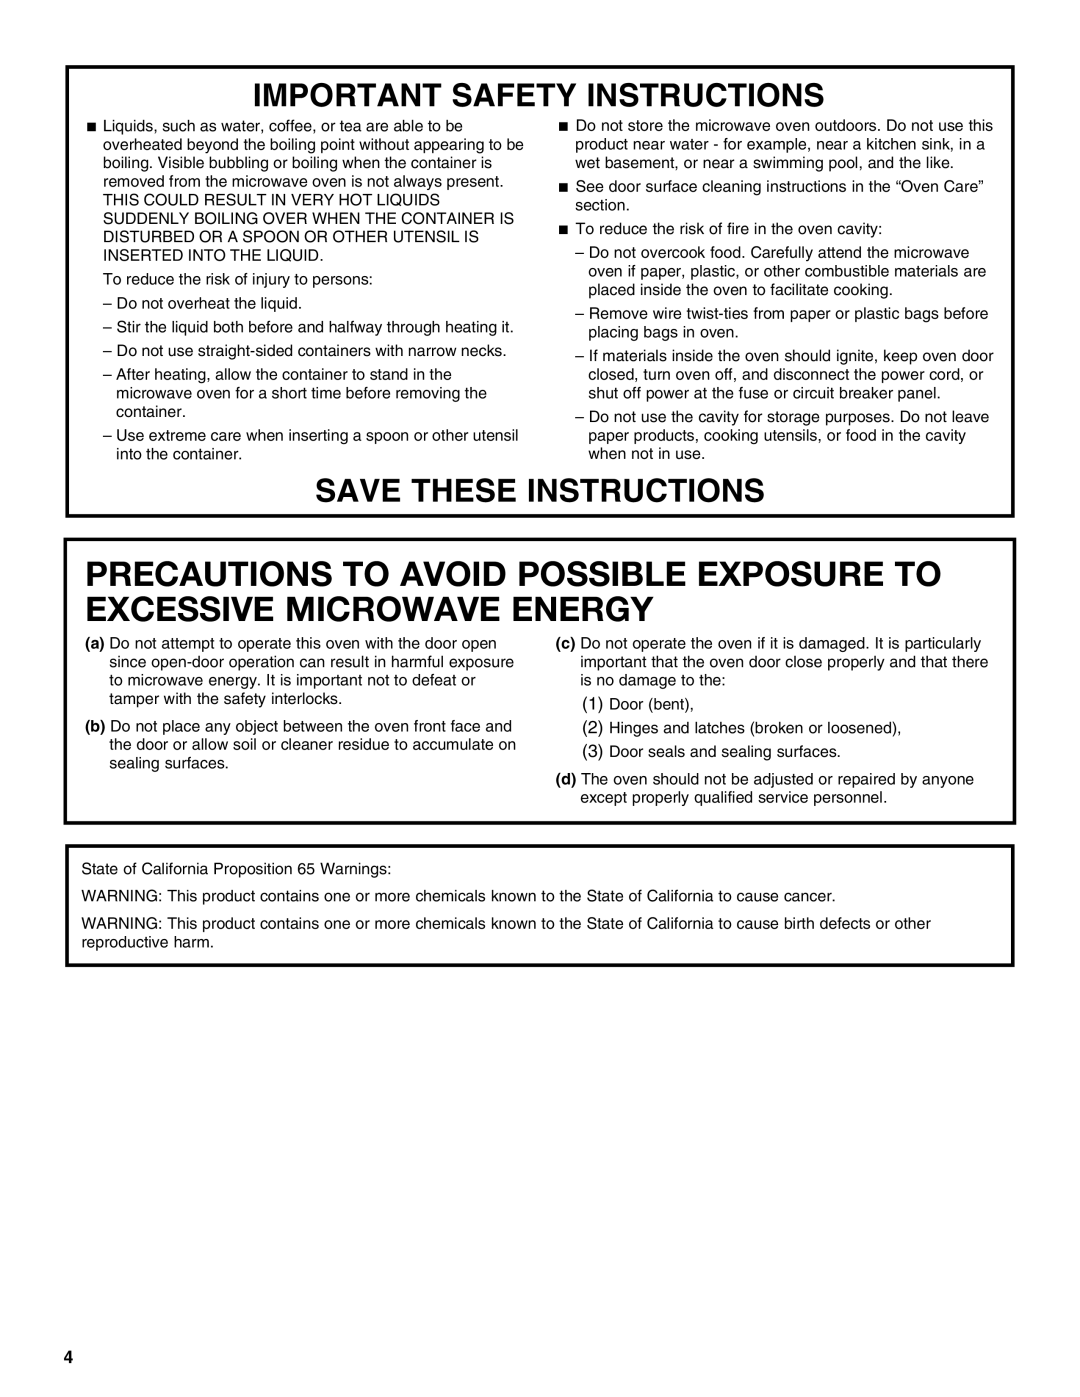 Jenn-Air JMW3430 manual Precautions To Avoid Possible Exposure To Excessive Microwave Energy, Important Safety Instructions 